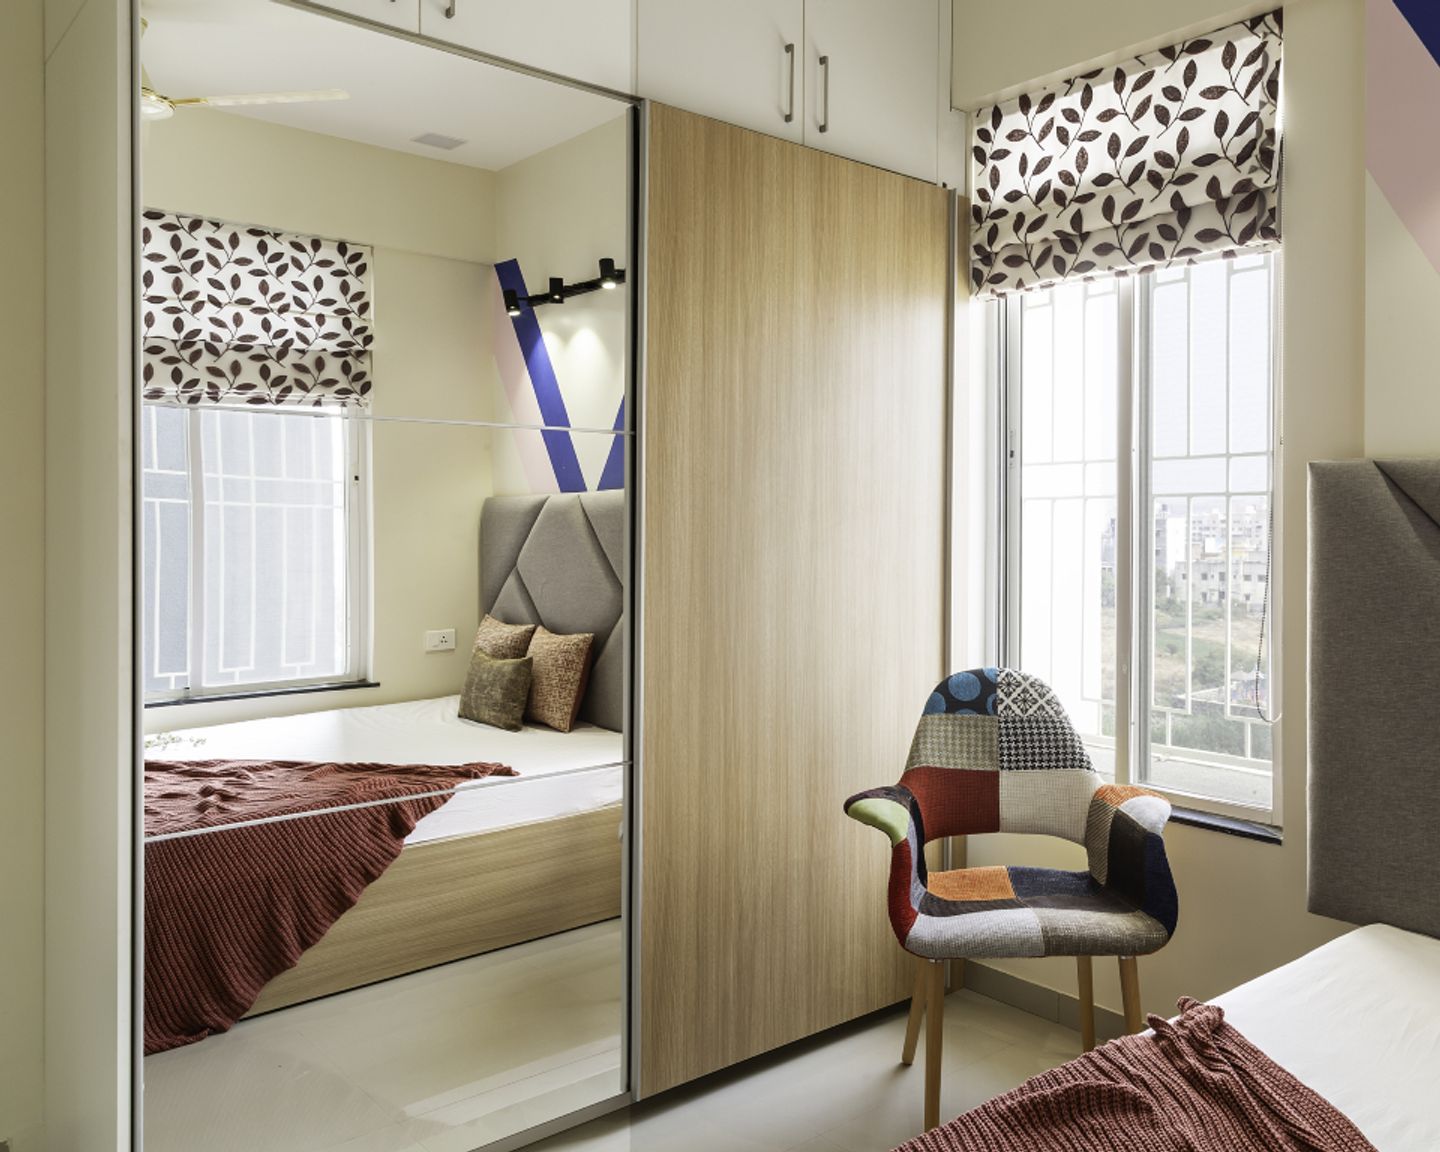 Bedroom Wardrobe With A Wooden Texture - Livspace